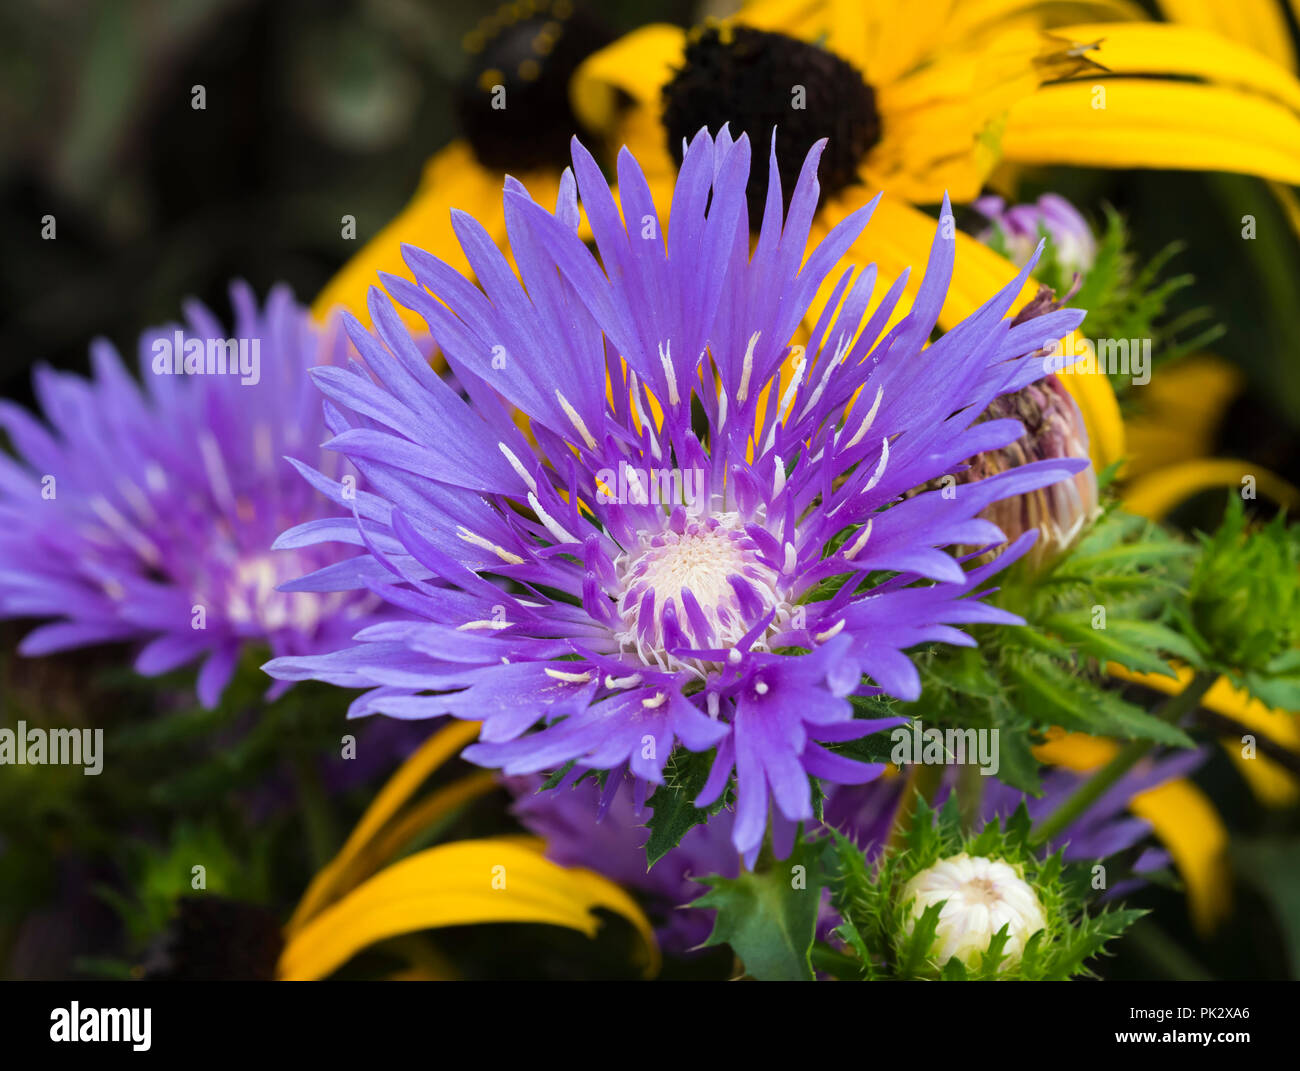 Purple flower of the very hardy Cornflower Aster, Stokesia Laevis 'Mels Blue' plant, a semi-evergreen perennial in early Autumn in West Sussex, UK. Stock Photo